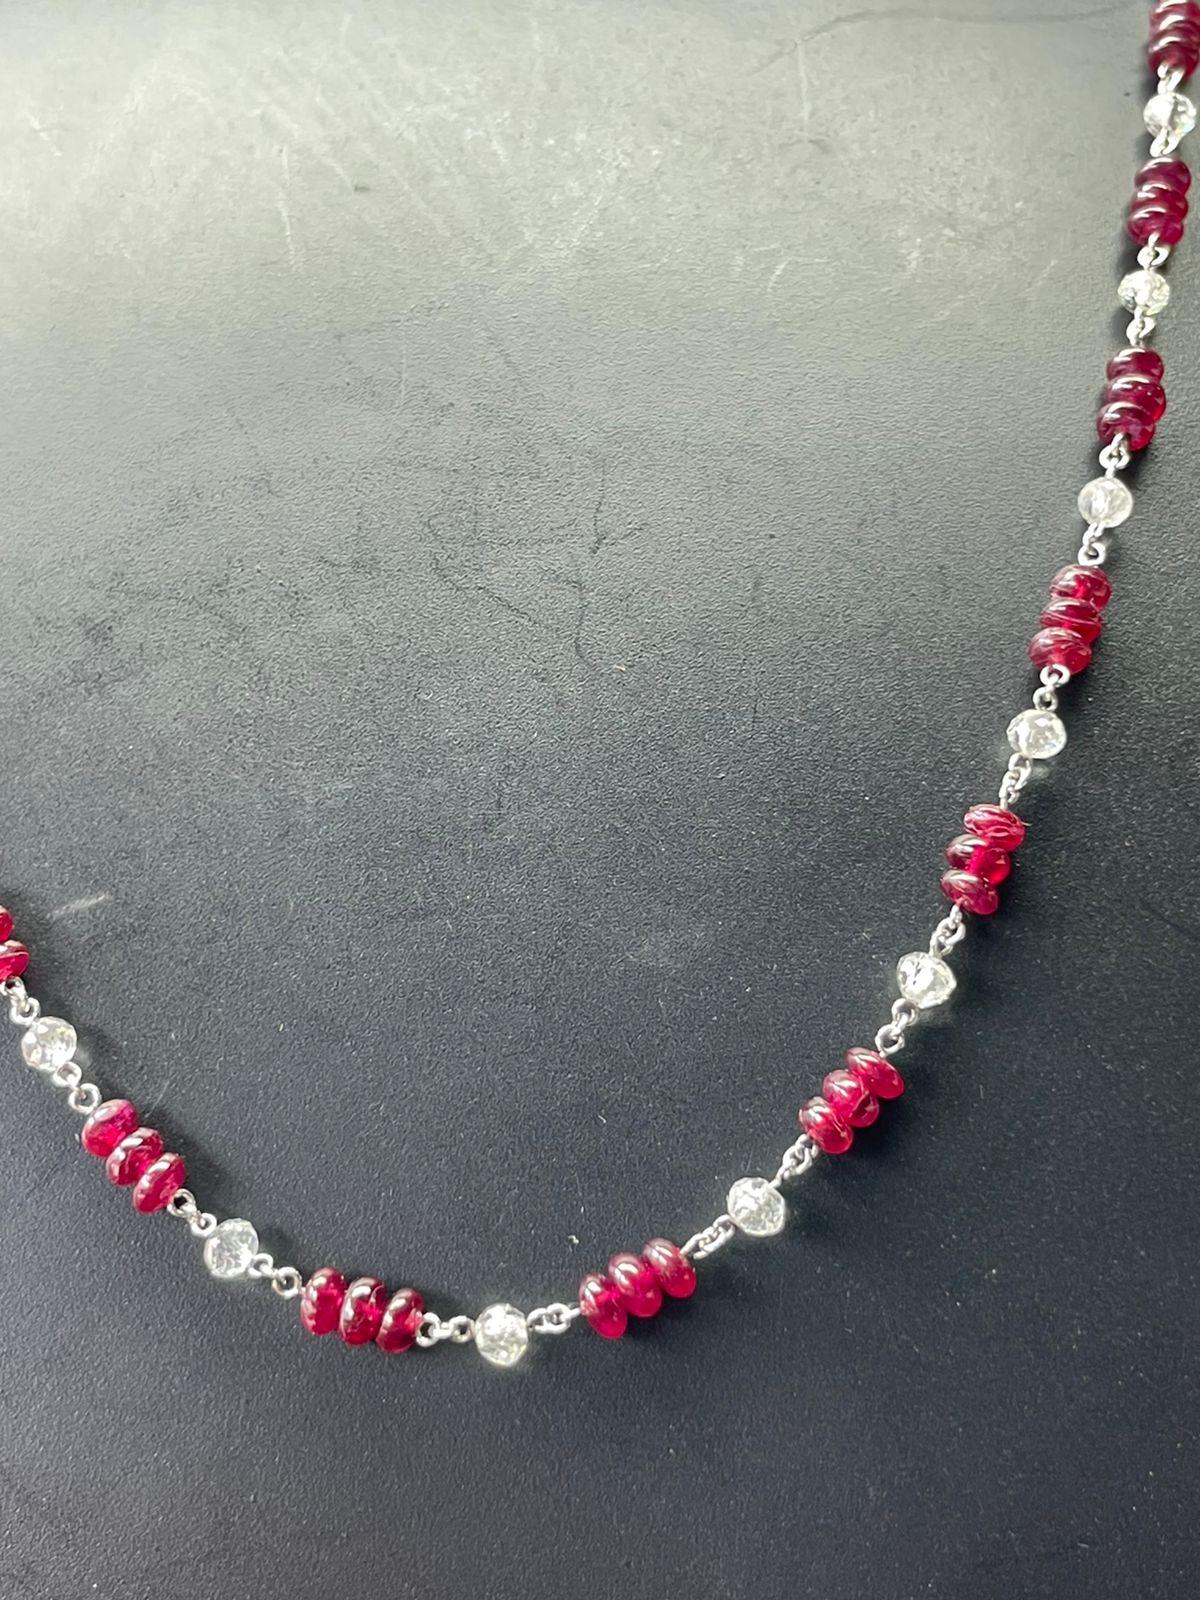 PANIM  18k White Gold Diamond Beads & Ruby Necklace For Sale 2